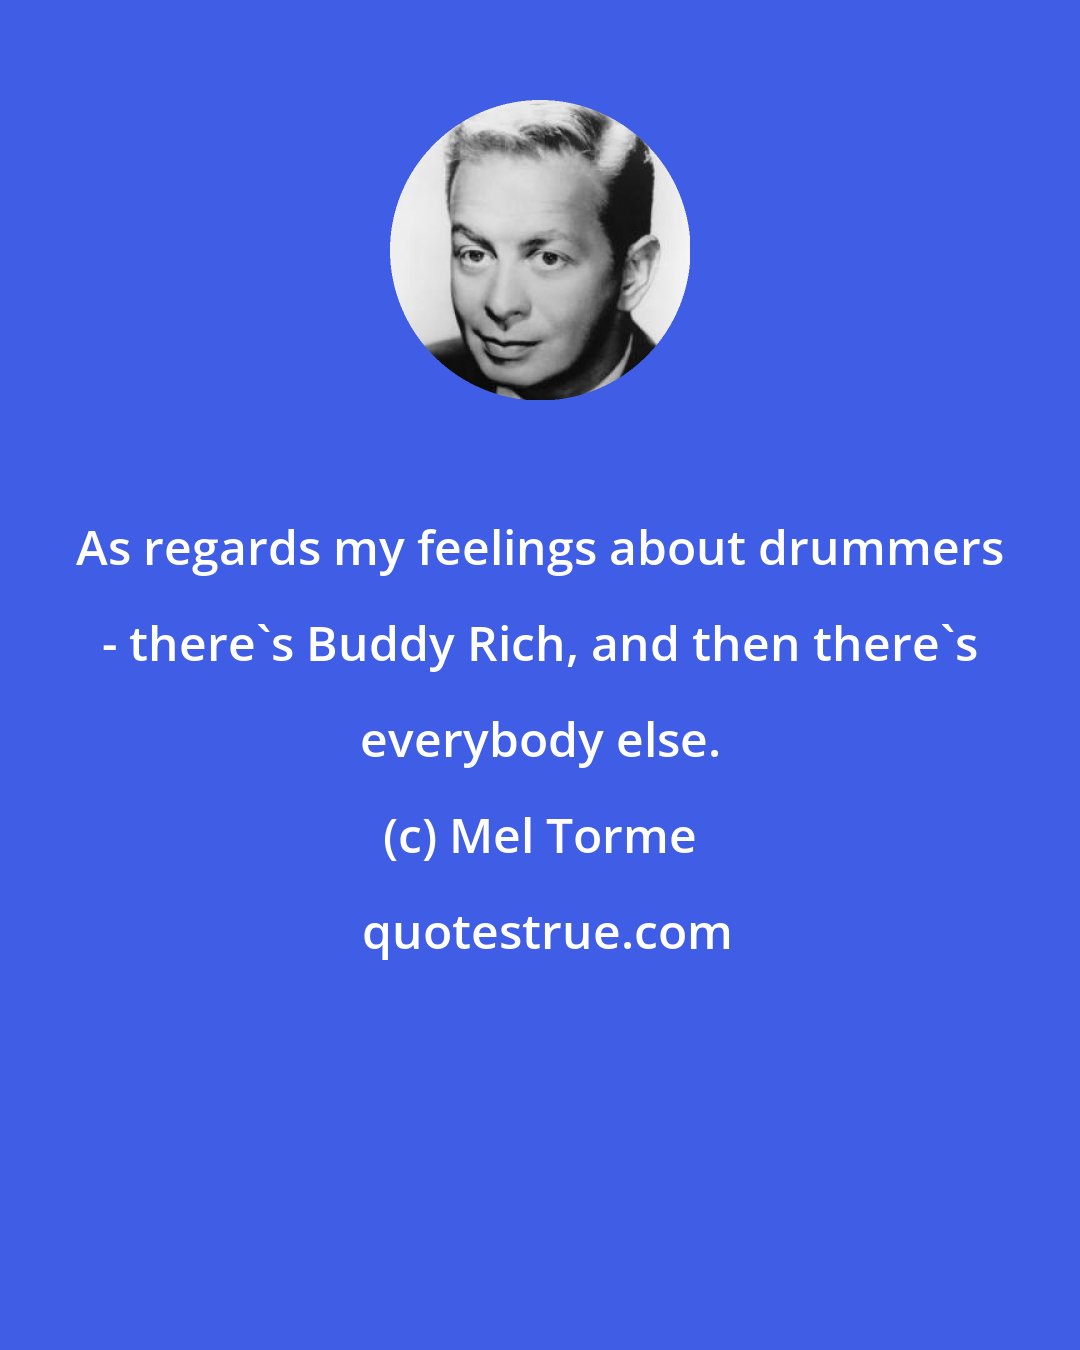 Mel Torme: As regards my feelings about drummers - there's Buddy Rich, and then there's everybody else.